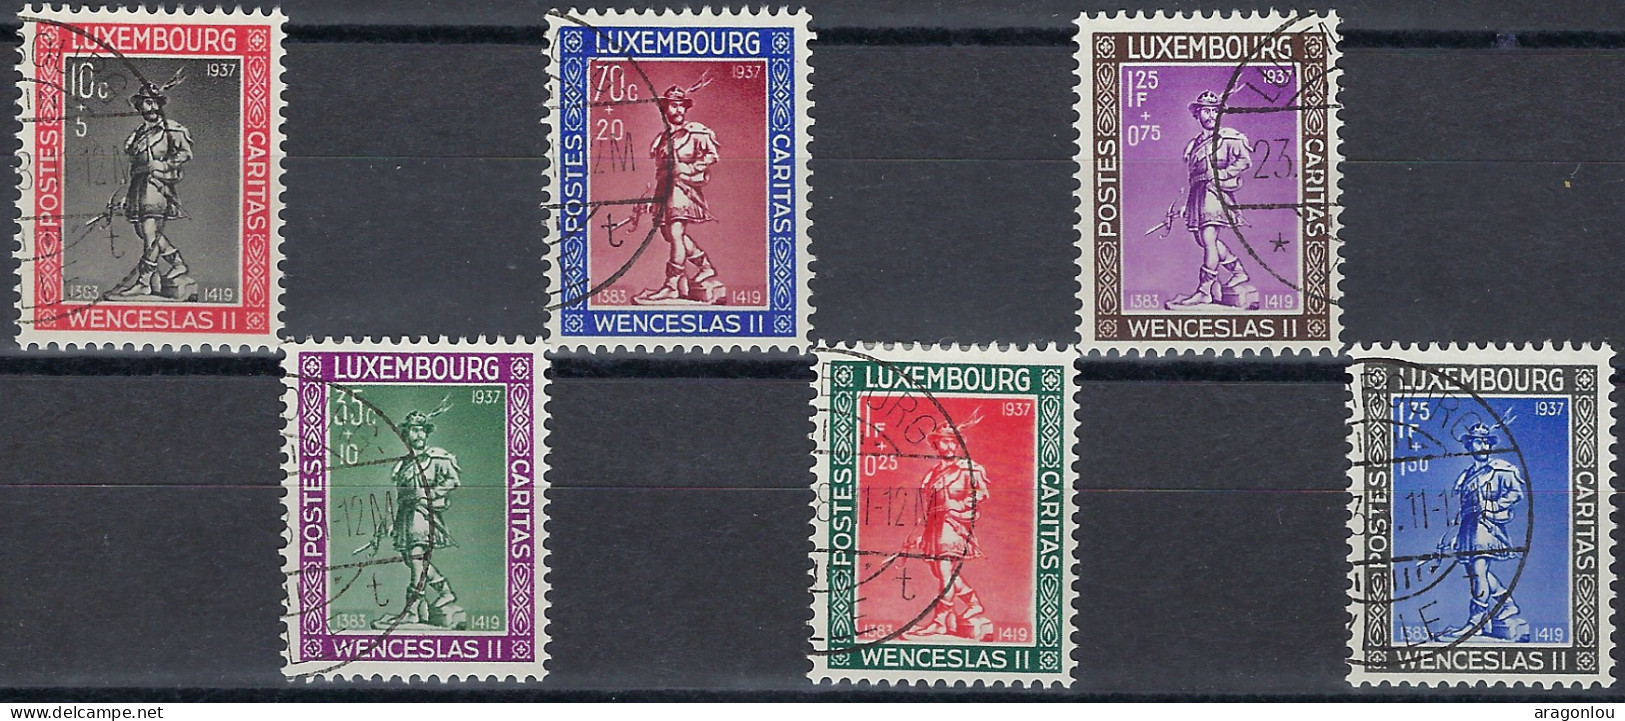 Luxembourg - Luxemburrg - Timbres  1937   Wenzels II      Série   ° - Usati